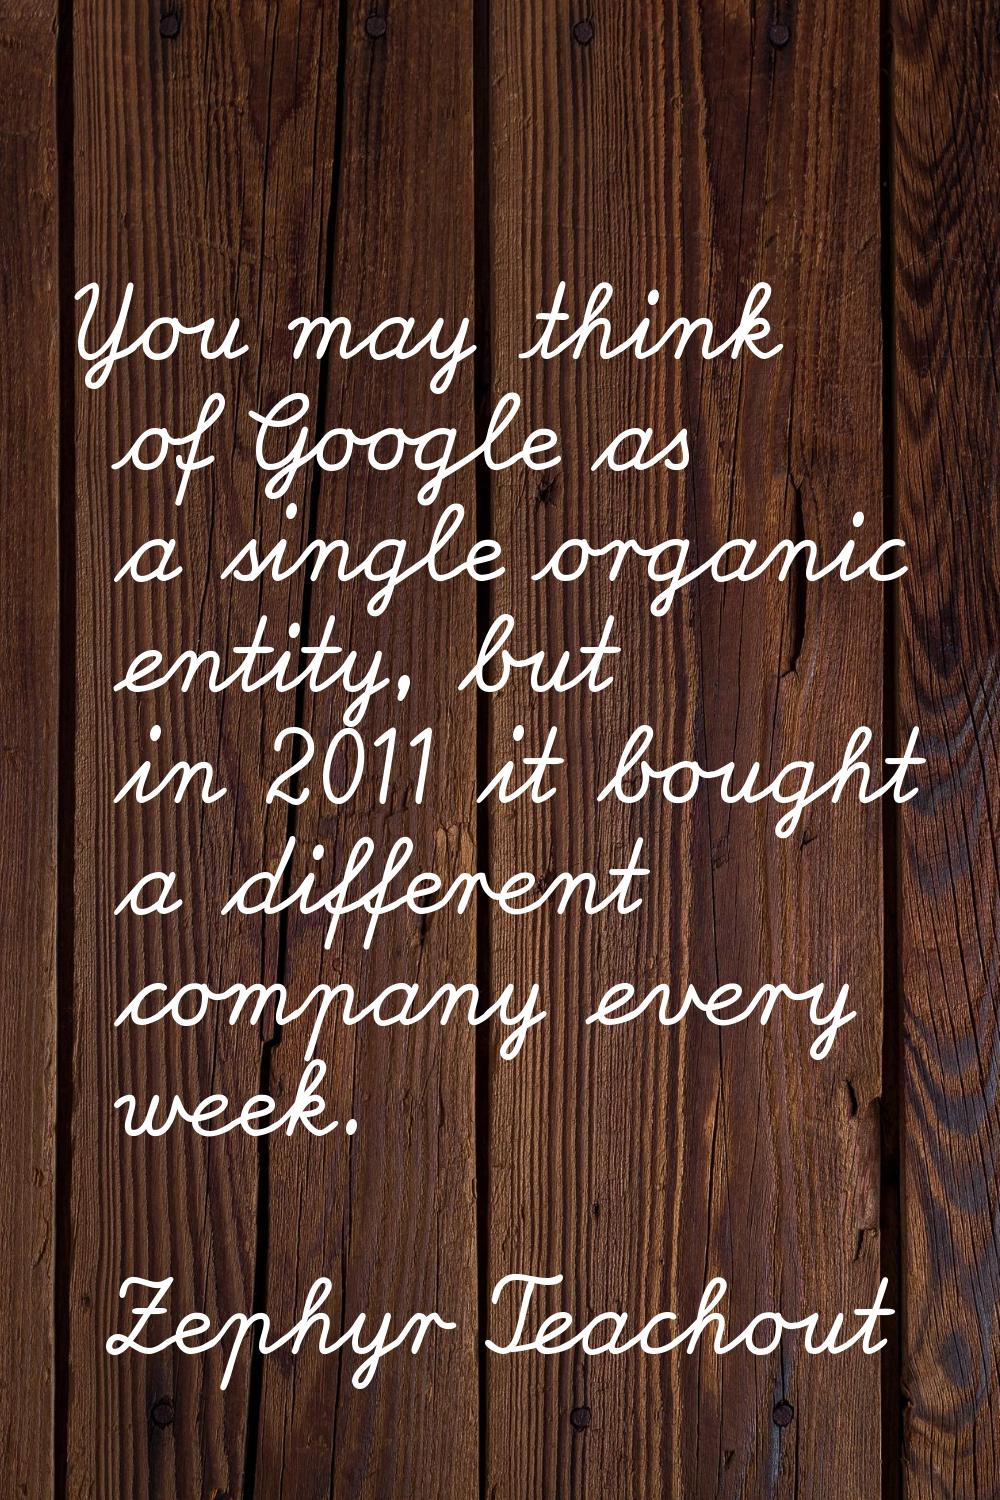 You may think of Google as a single organic entity, but in 2011 it bought a different company every